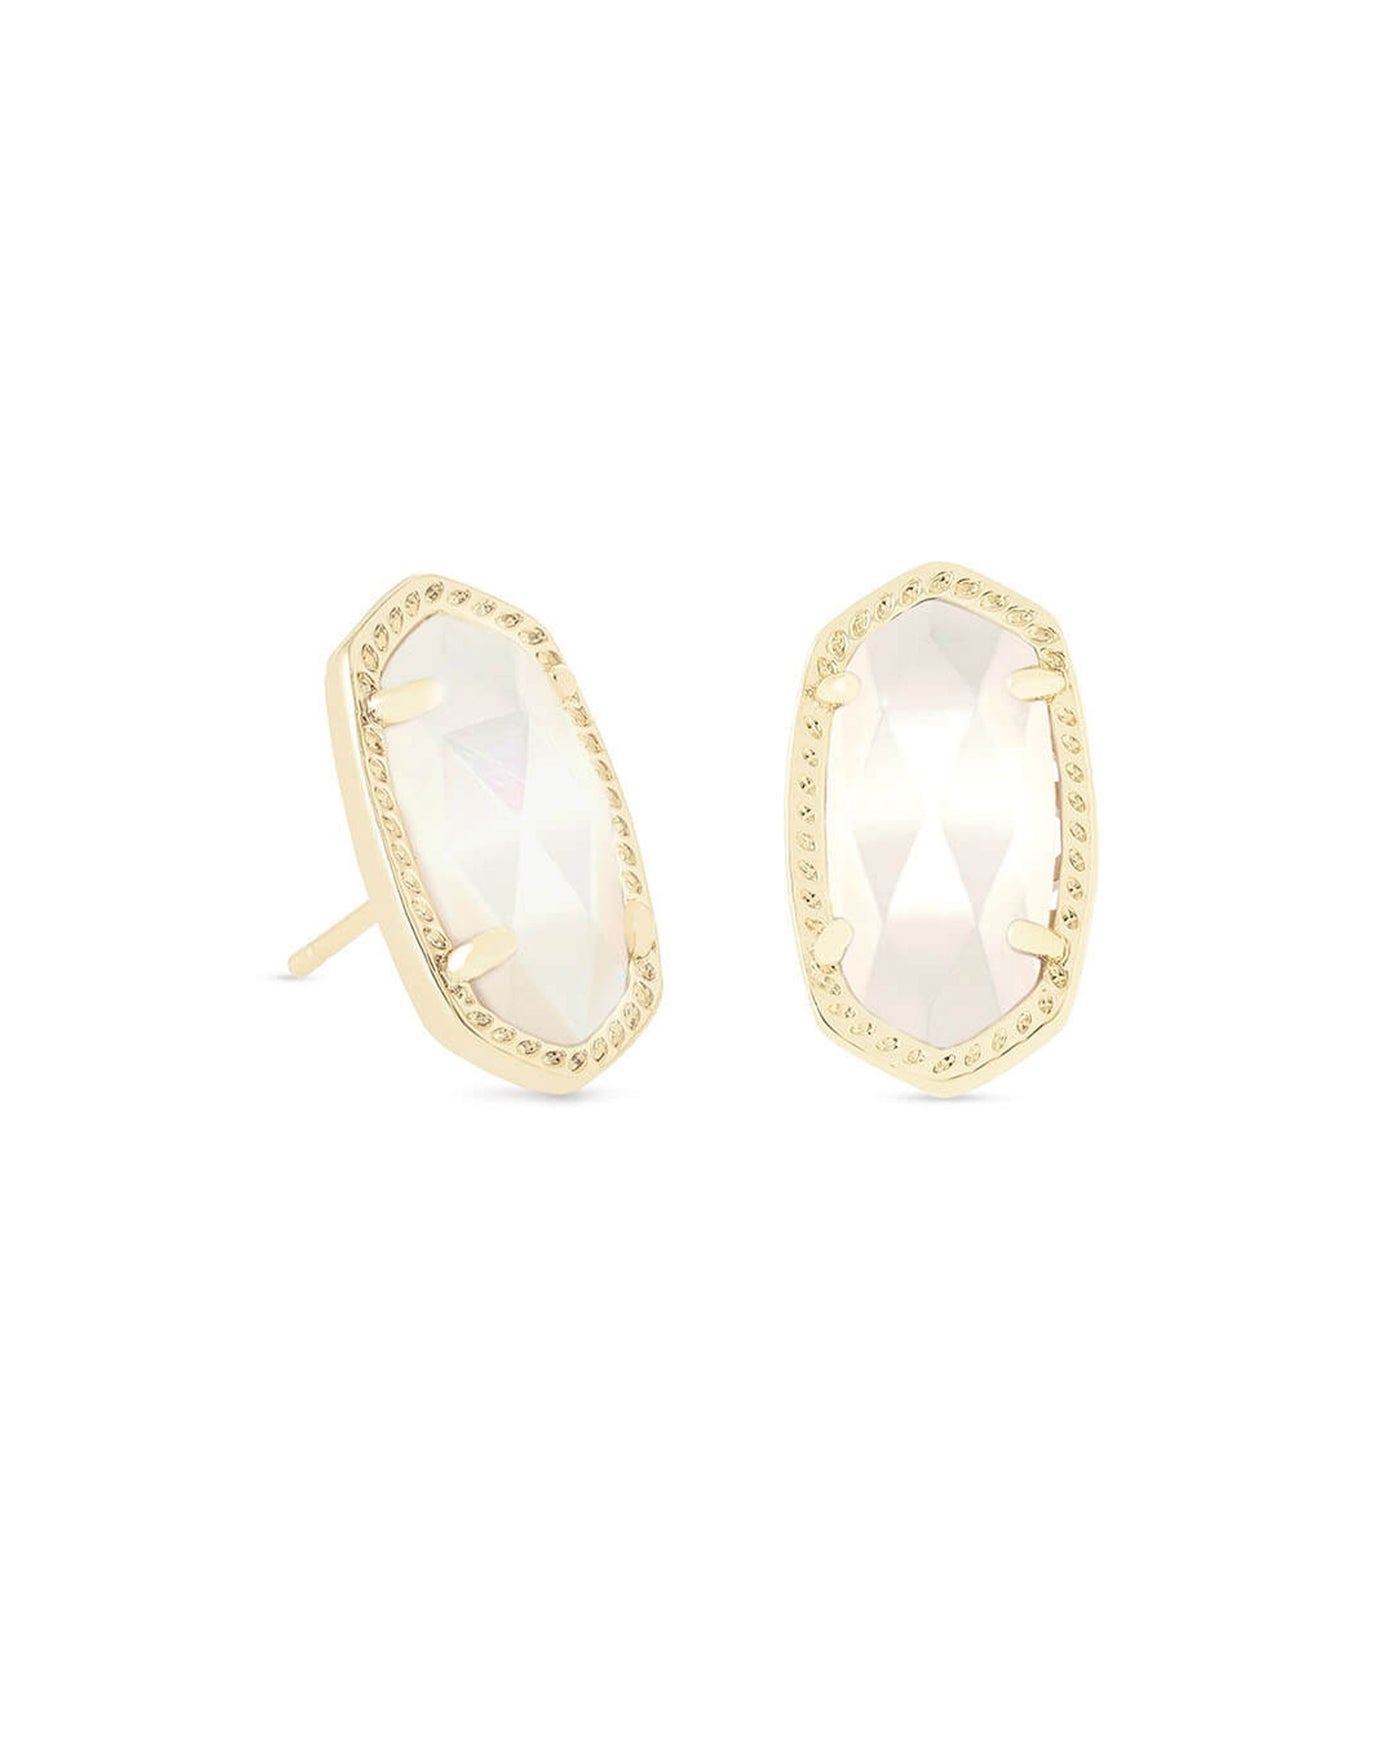 Kendra Scott Ellie Gold Stud Earrings in Ivory Mother-Of-Pearl-Earrings-Kendra Scott-Market Street Nest, Fashionable Clothing, Shoes and Home Décor Located in Mabank, TX